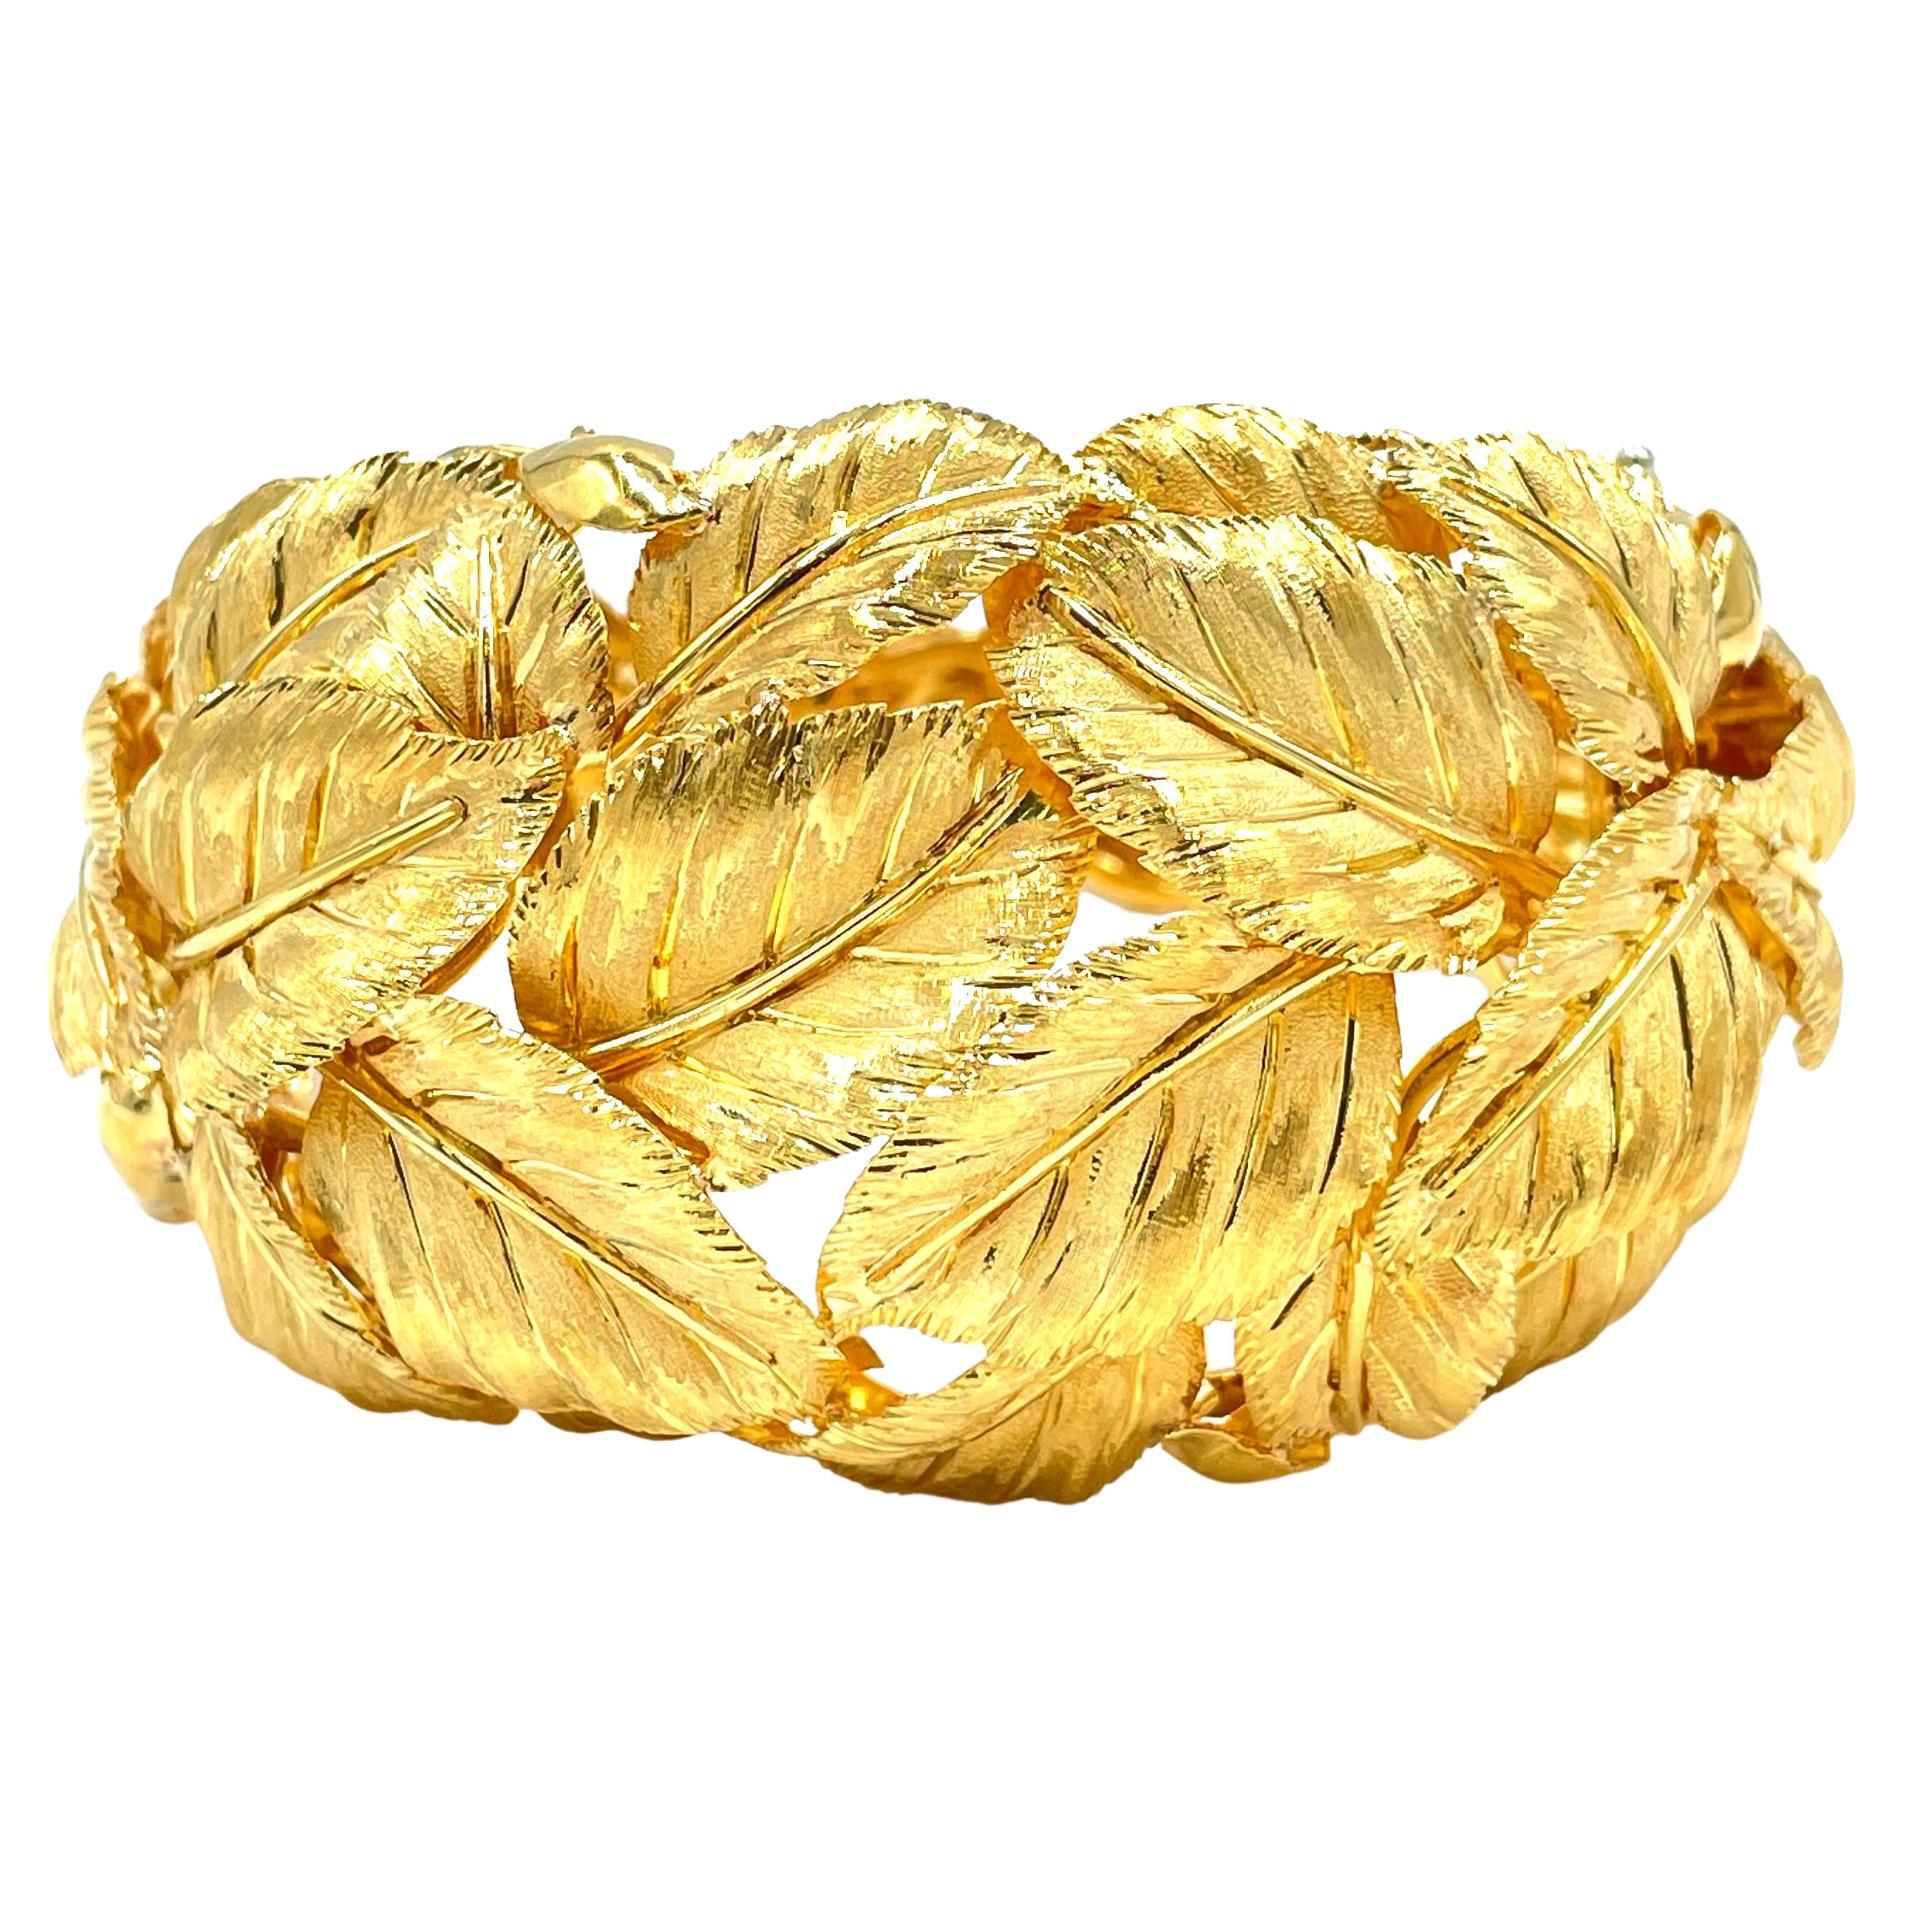 One of a kind, vintage handmade Italian bangle bracelet featuring hand crafted leaves.  The leaves are beautifully hand crafted with the utmost detail. The bracelet is solid and measures approximately 44mm at its widest and tapers down to